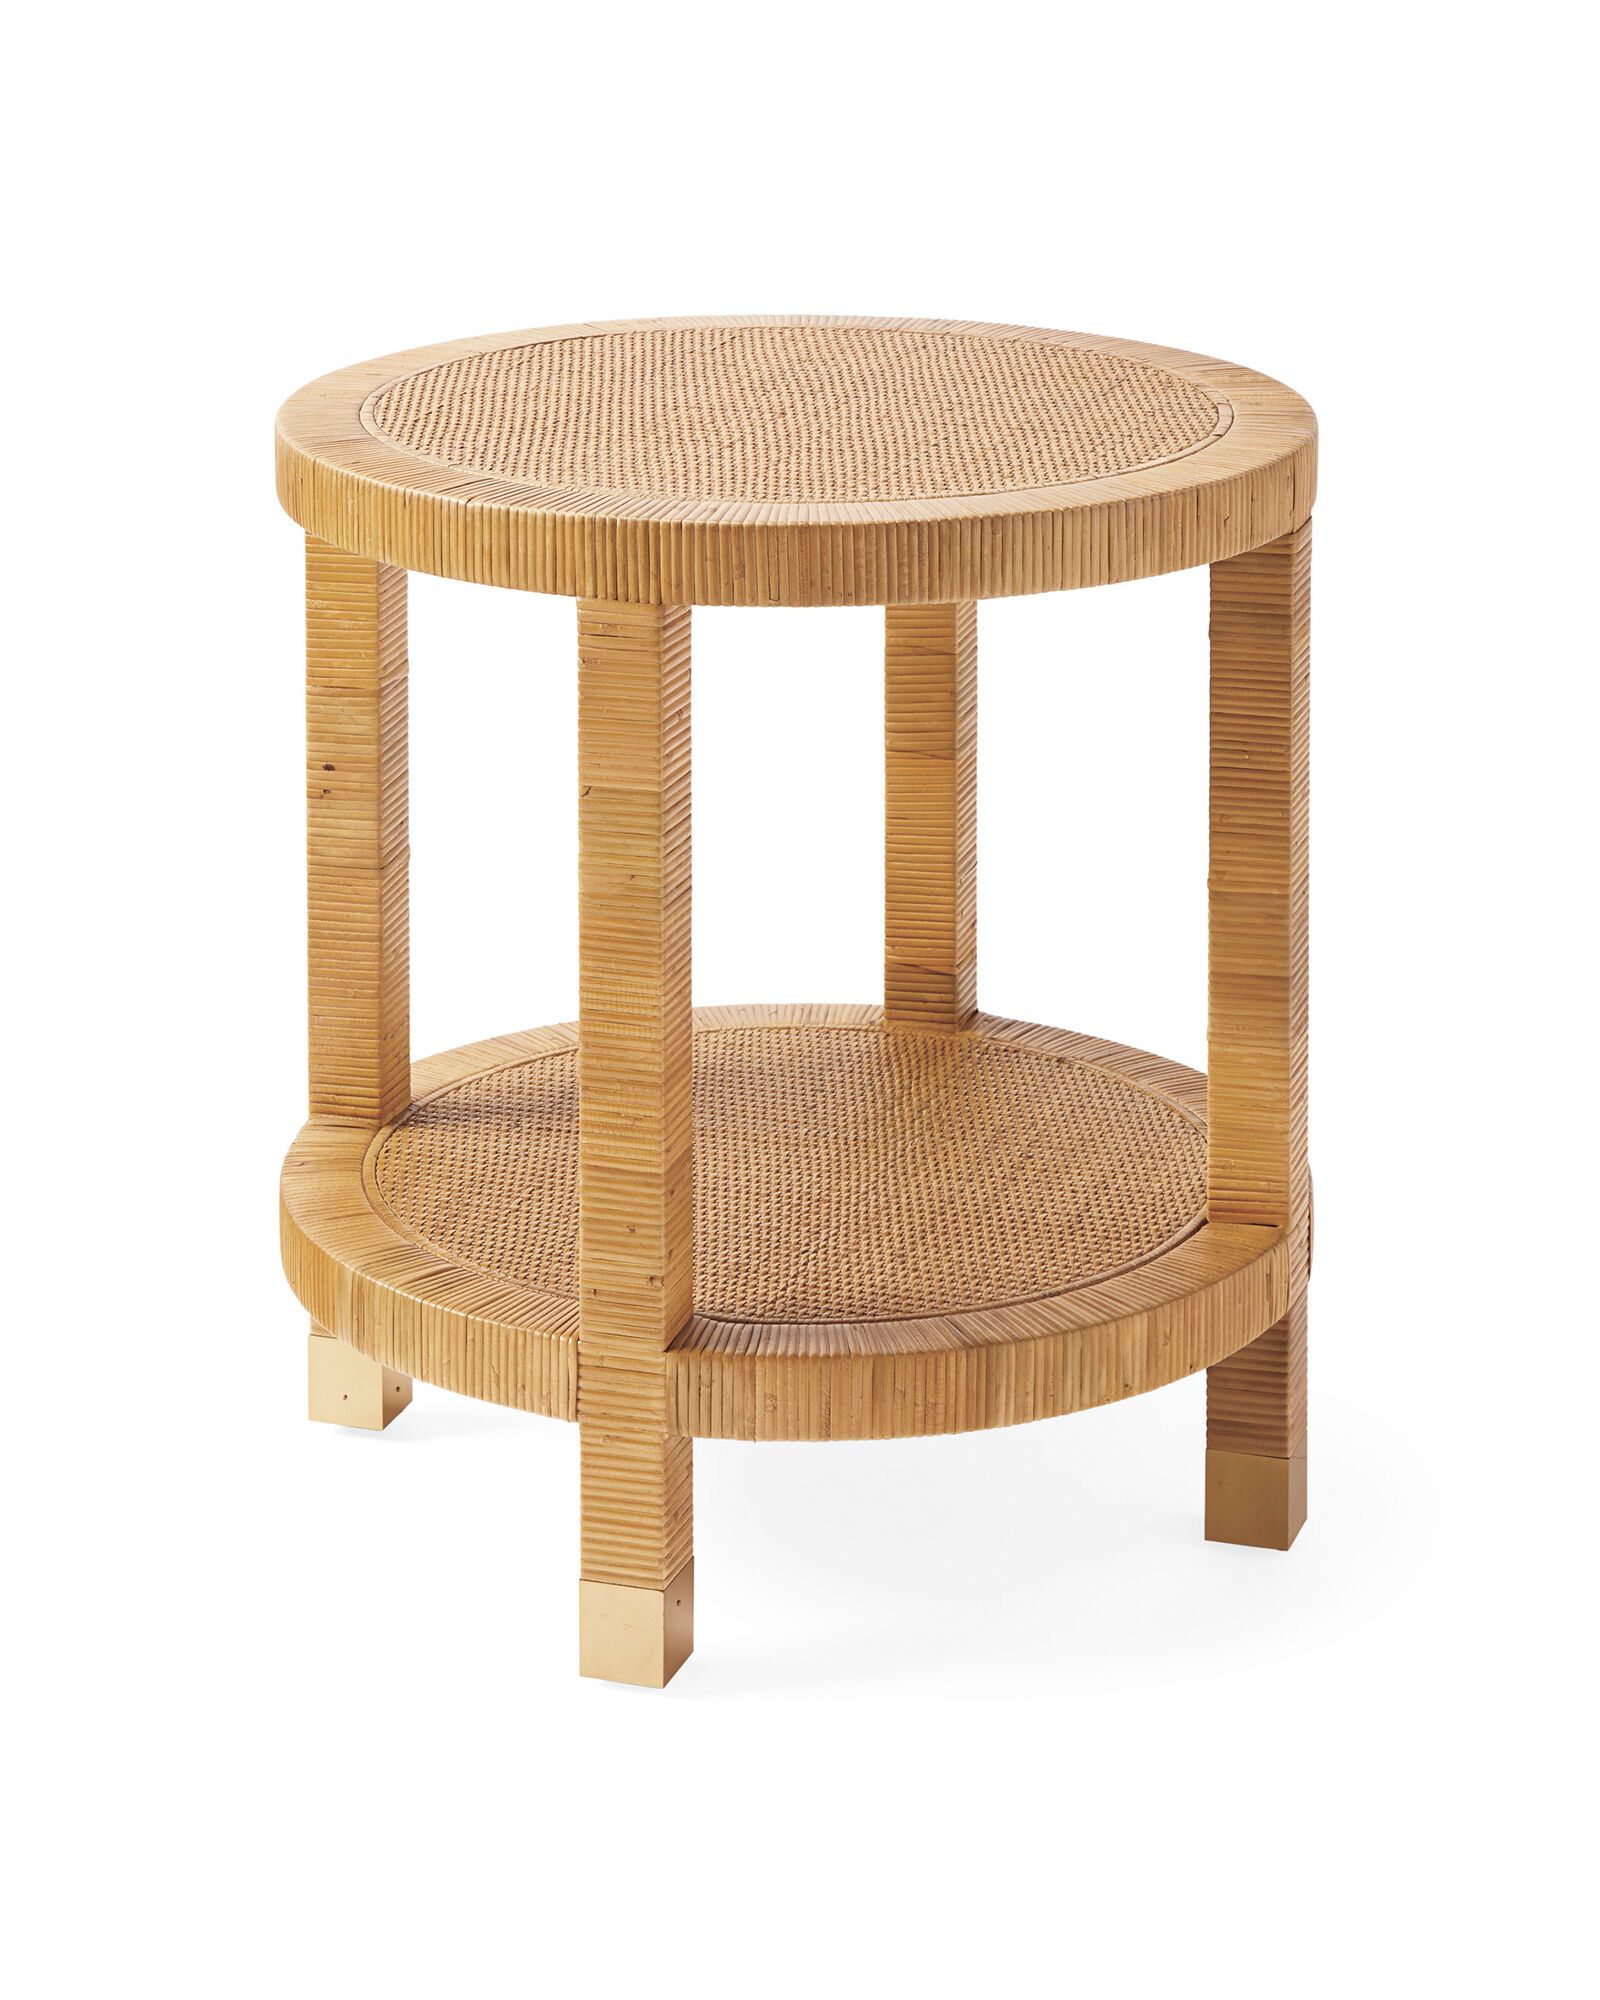 Balboa Side Table | Serena and Lily